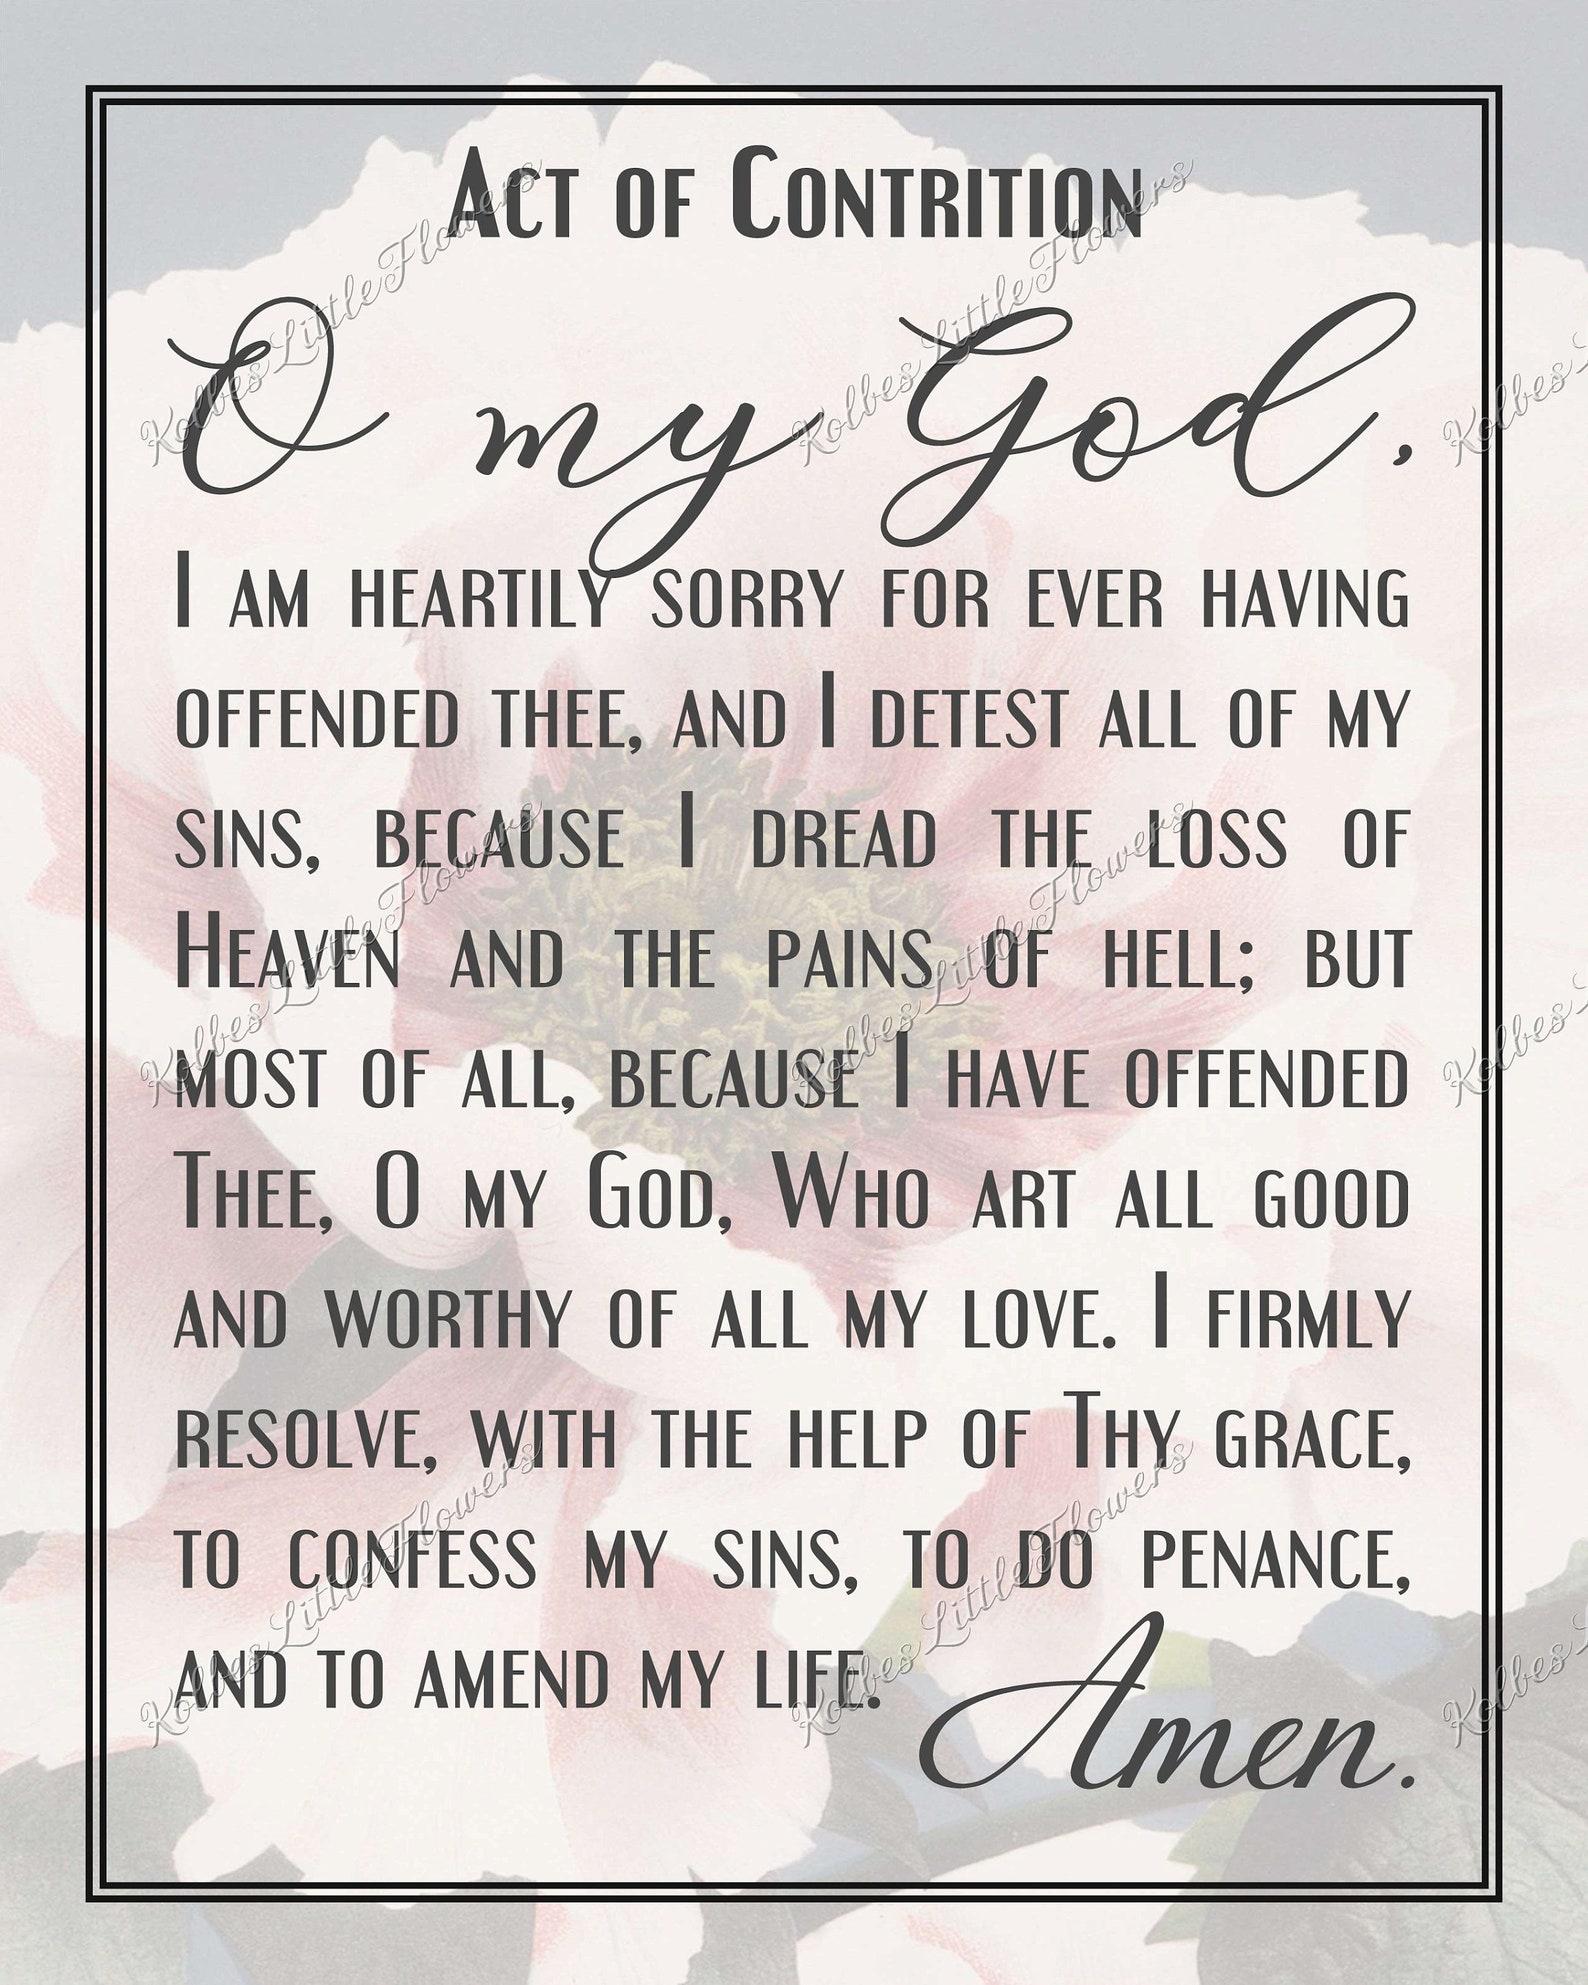 act-of-contrition-prayer-card-hot-sex-picture